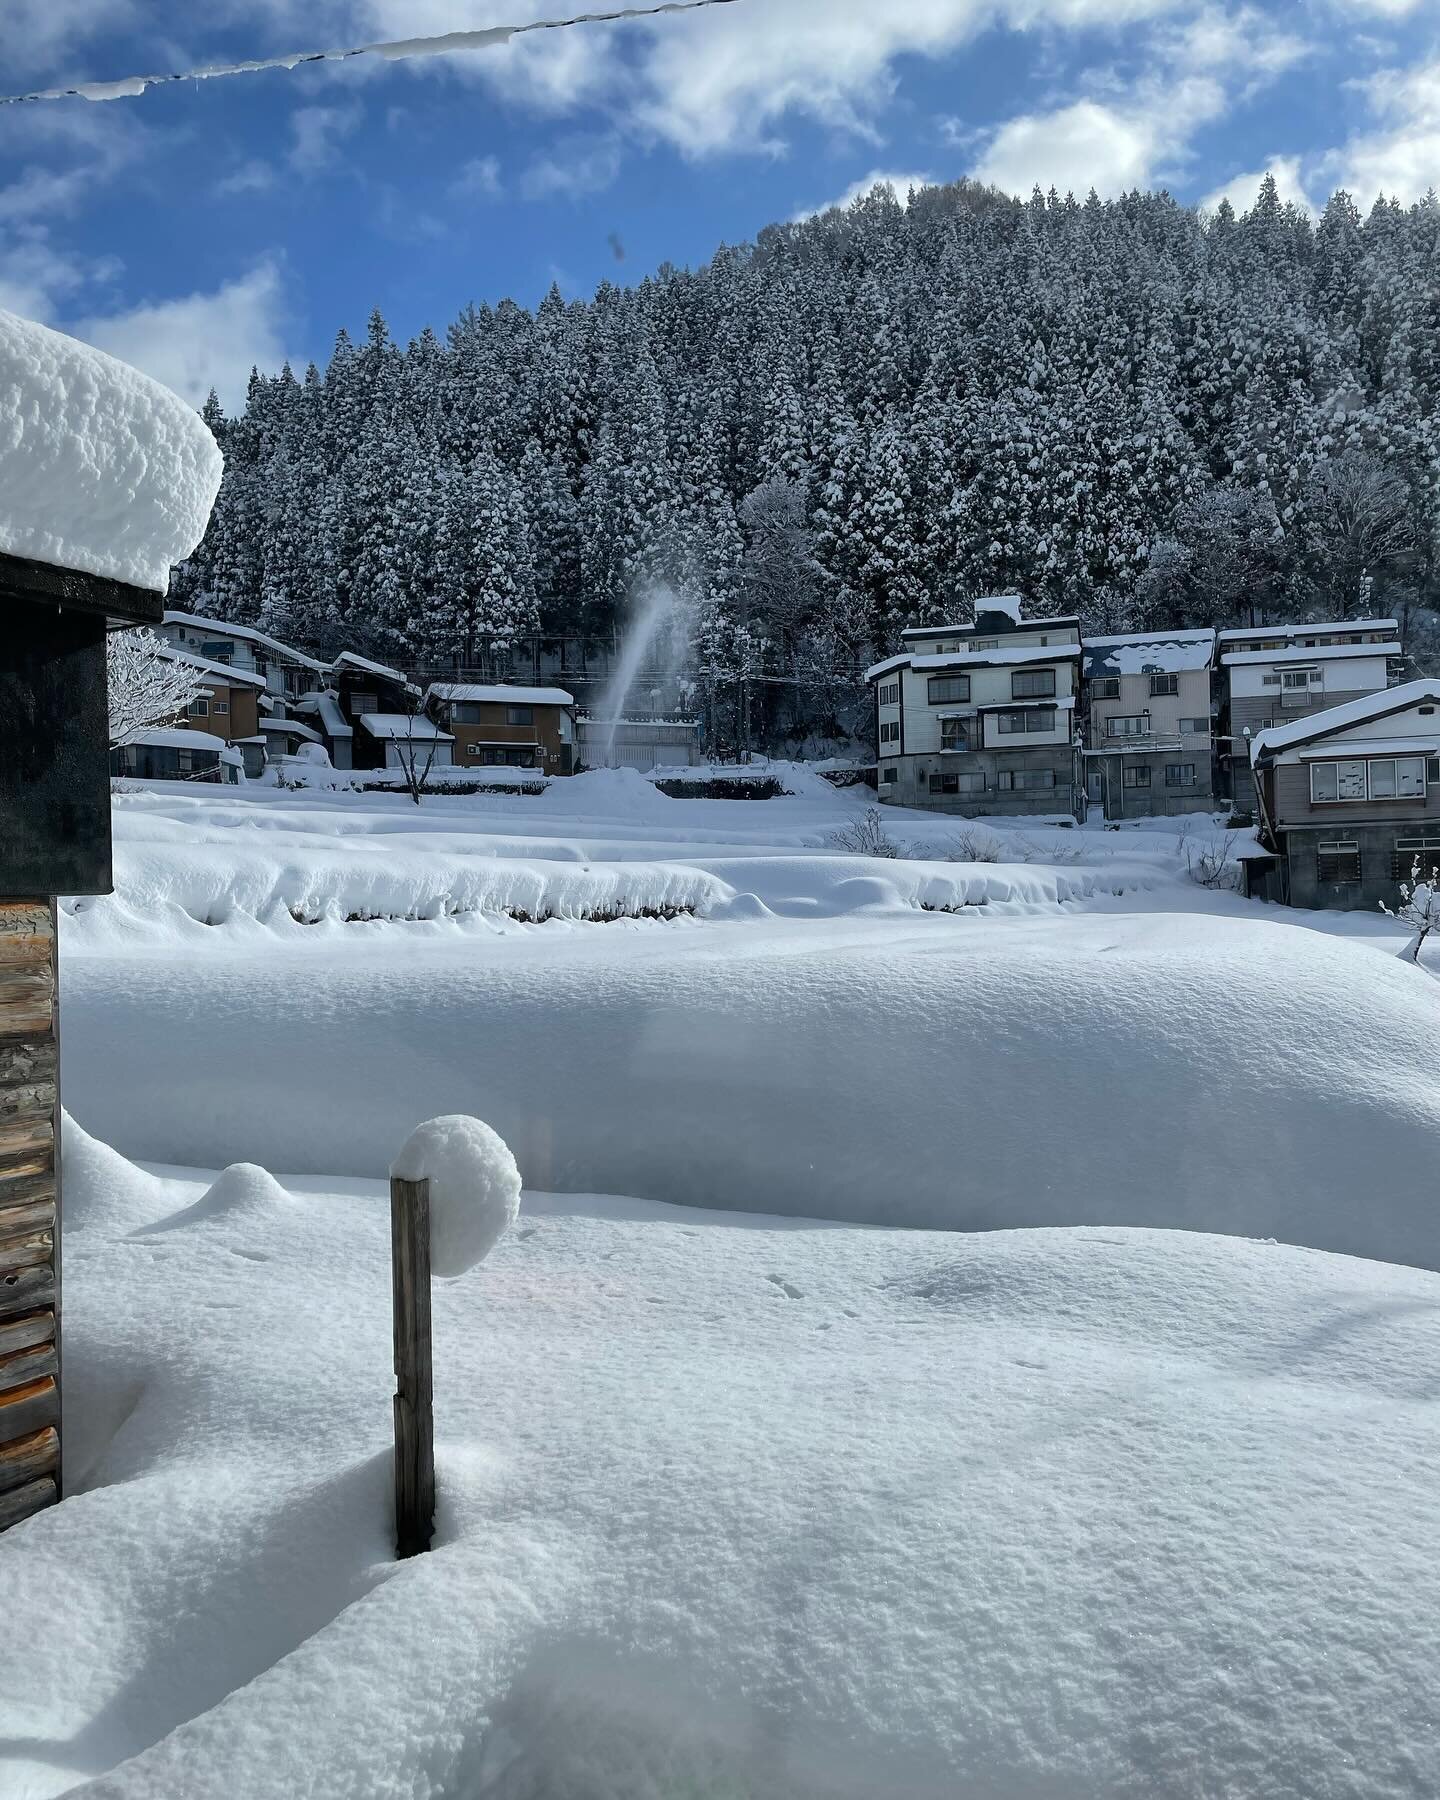 White Christmas 🎅 🎄 in Nozawa Onsen. We wish you all a Merry Christmas and hope you are enjoying your time with Family and friends&hellip;

Today we serve our famous Hot Gl&uuml;hwein to start off the Christmas celebrations

Tomorrow Monday the Aka